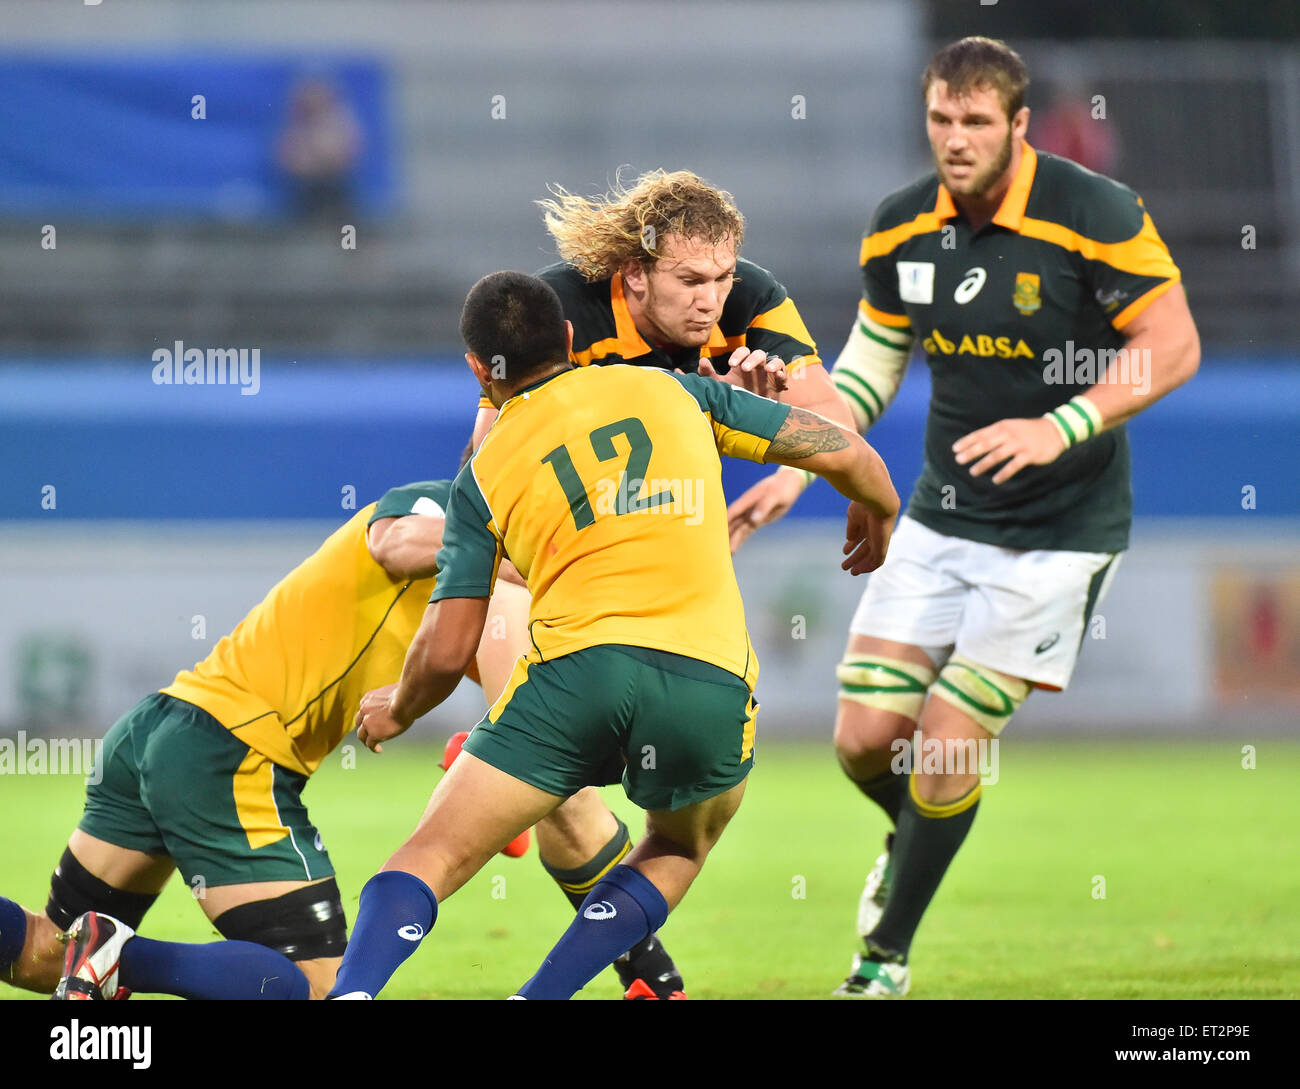 South Africa versus Australia at the World Rugby Under 20 Championship in 2015 Stock Photo